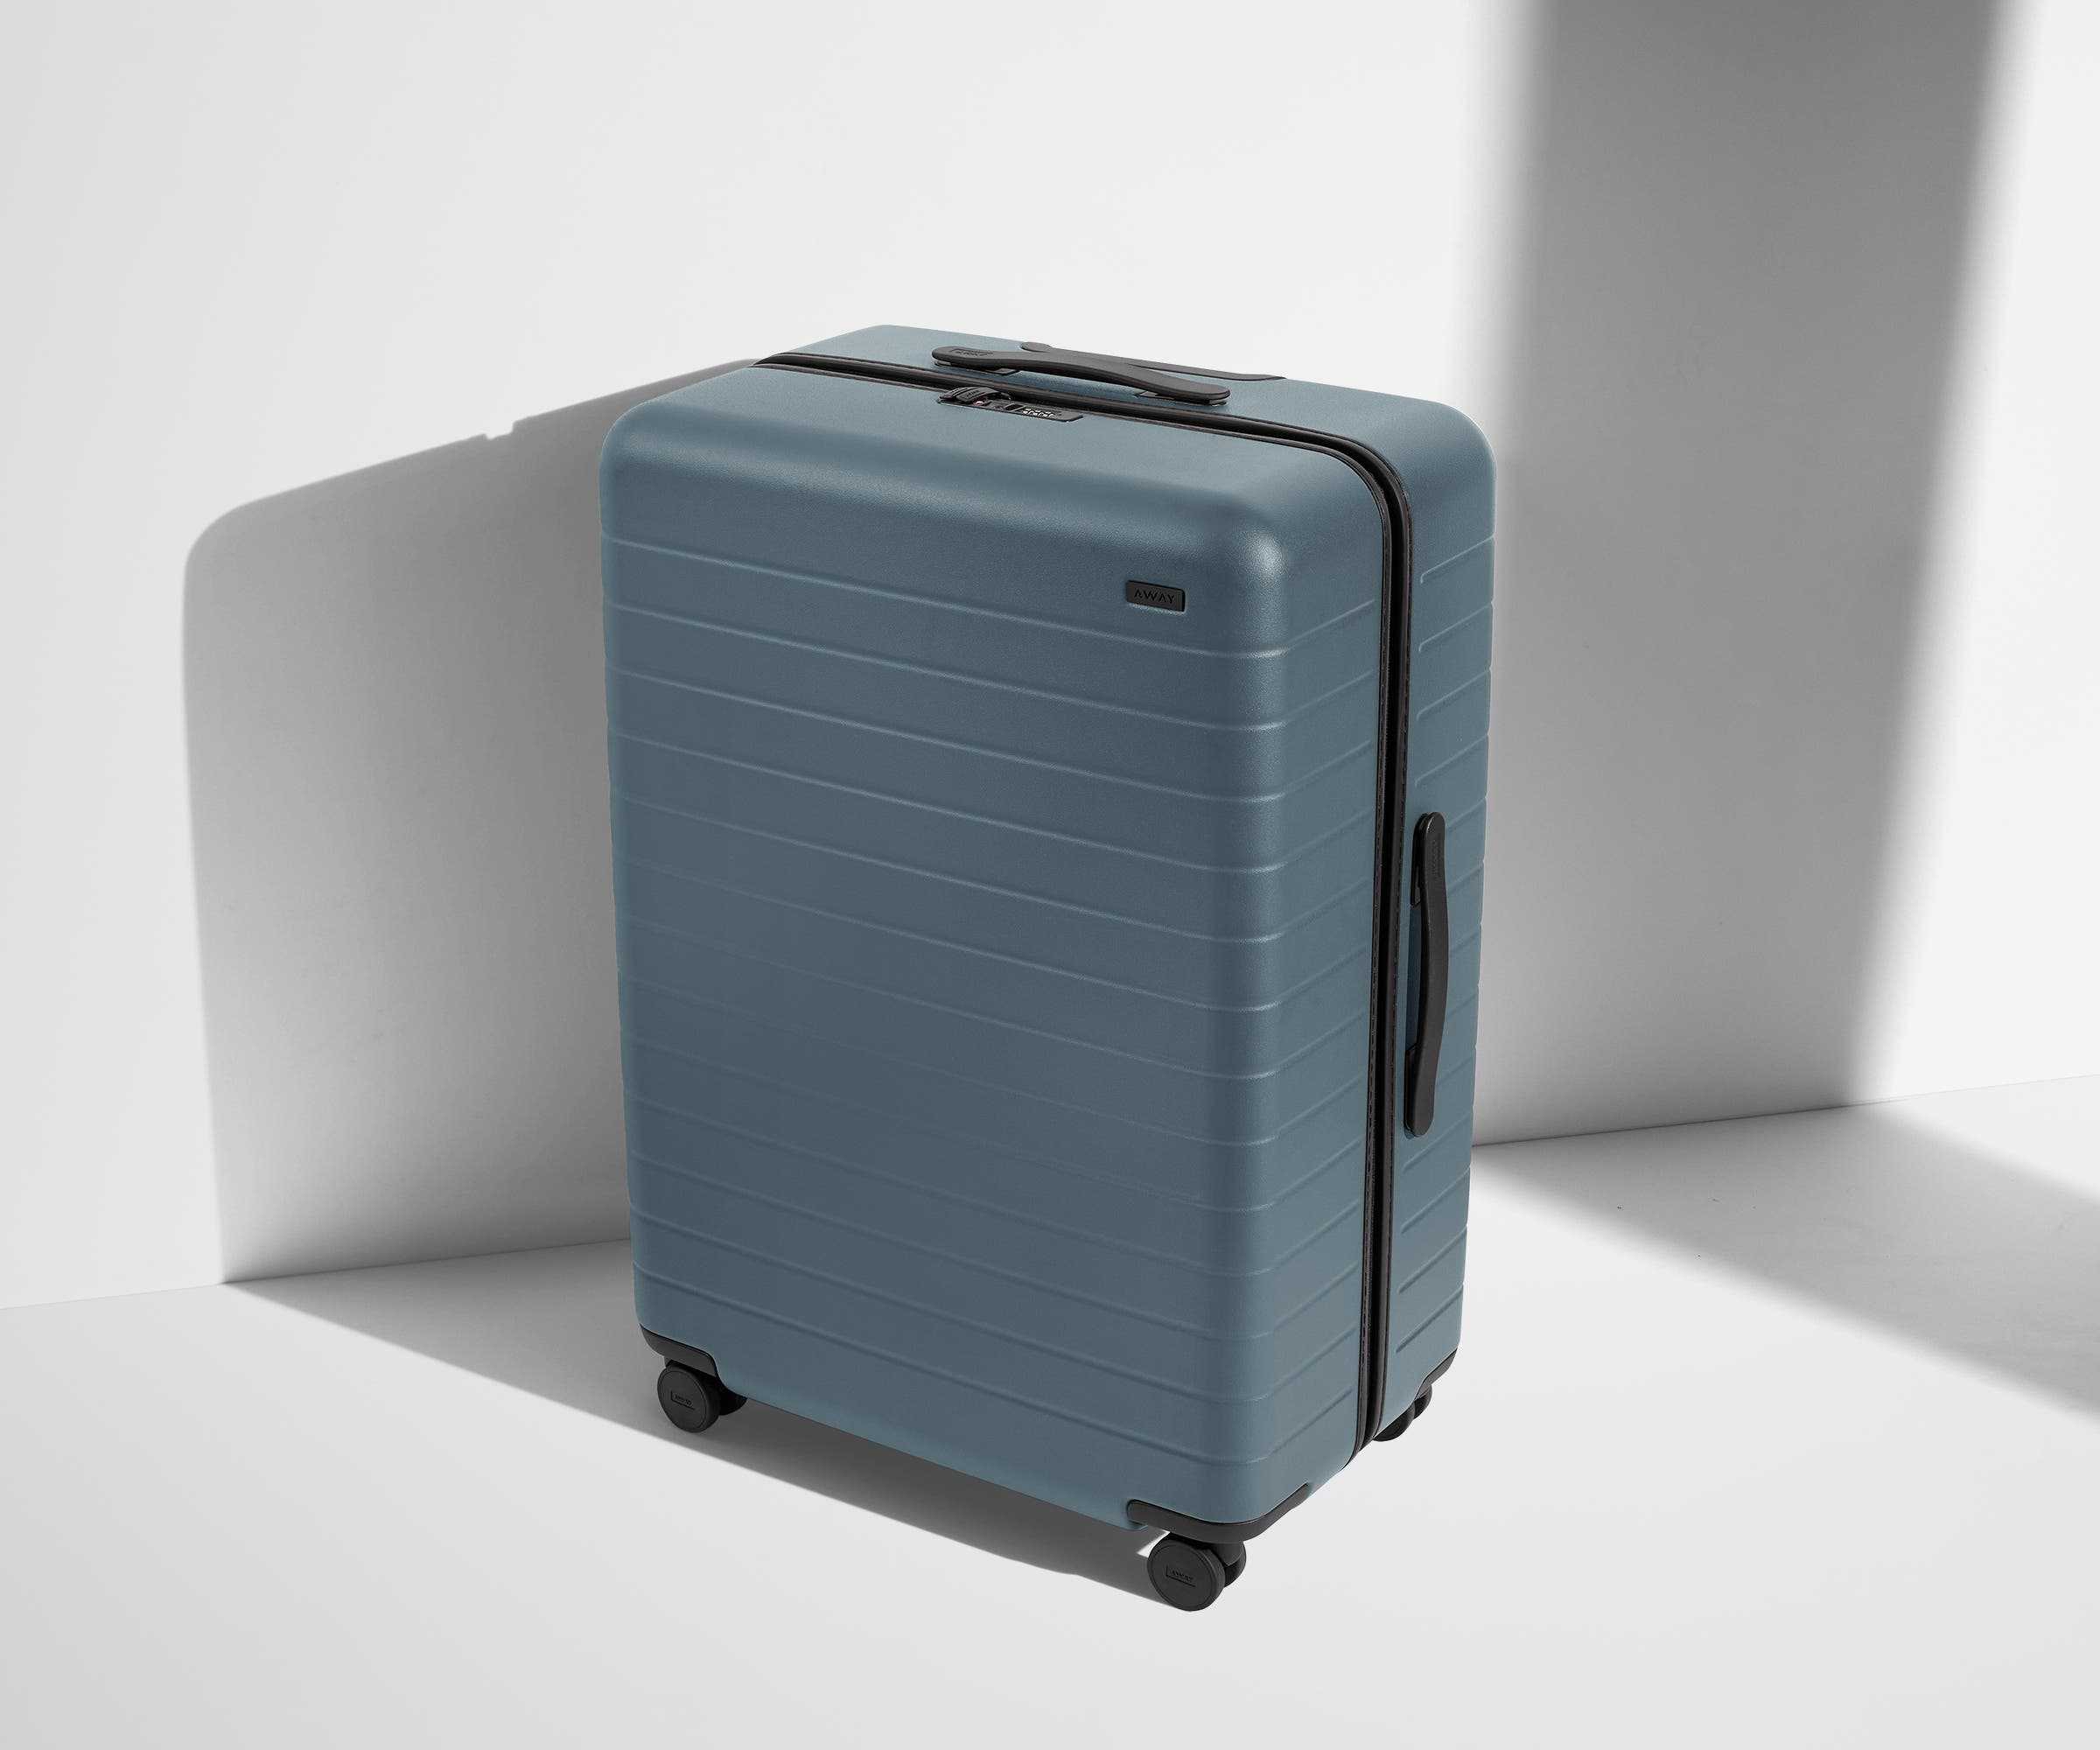 20% off all suitcase styles, colors, and sizes